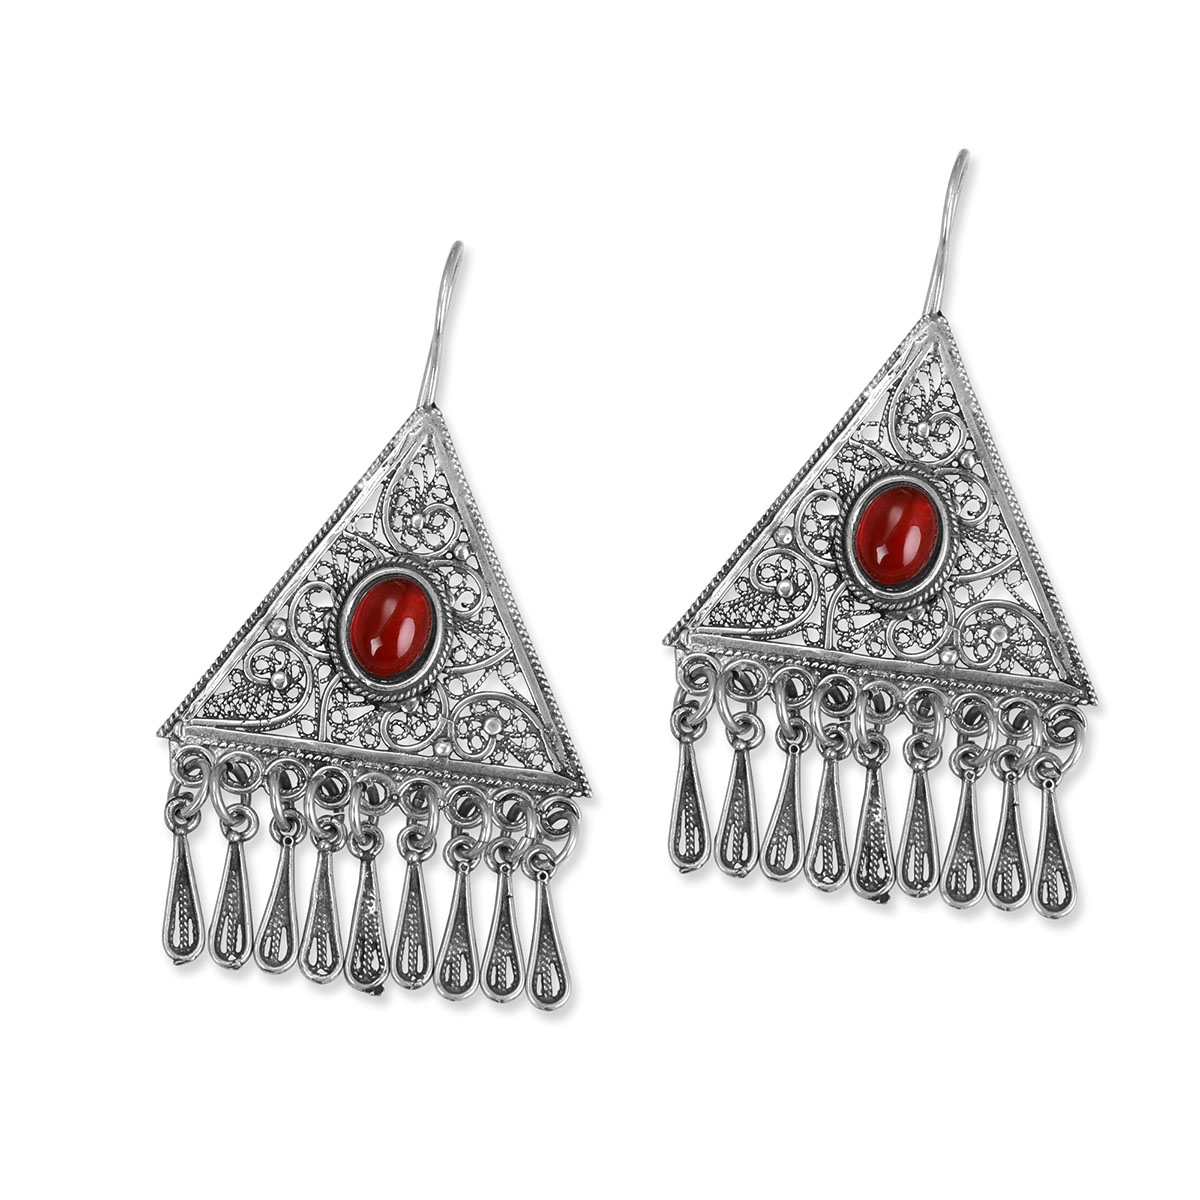 Traditional Yemenite Art Handcrafted Sterling Silver Filigree Earrings With Teardrops and Red Carnelian Stones - 1